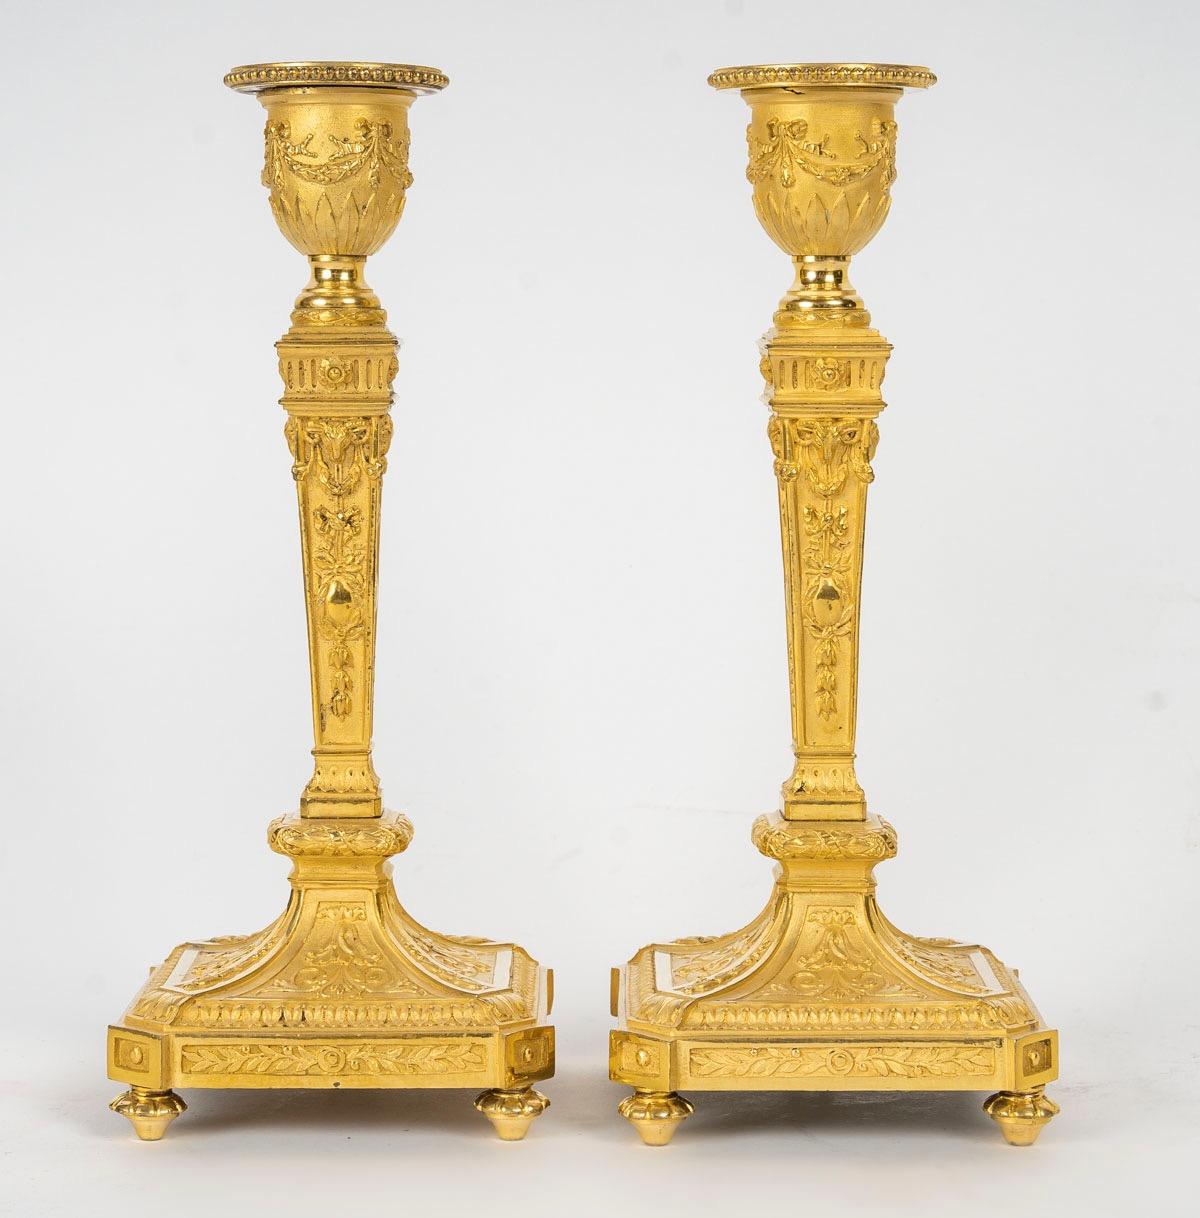 Very Fine French 19th Century Pair of Candlesticks 

In ormolu, very finely chiseled and decorated with knotted garlands, branches of leafy flowers, spokes of hearts, leaves of water, pearls. The was in sheath resting on a square base with curved